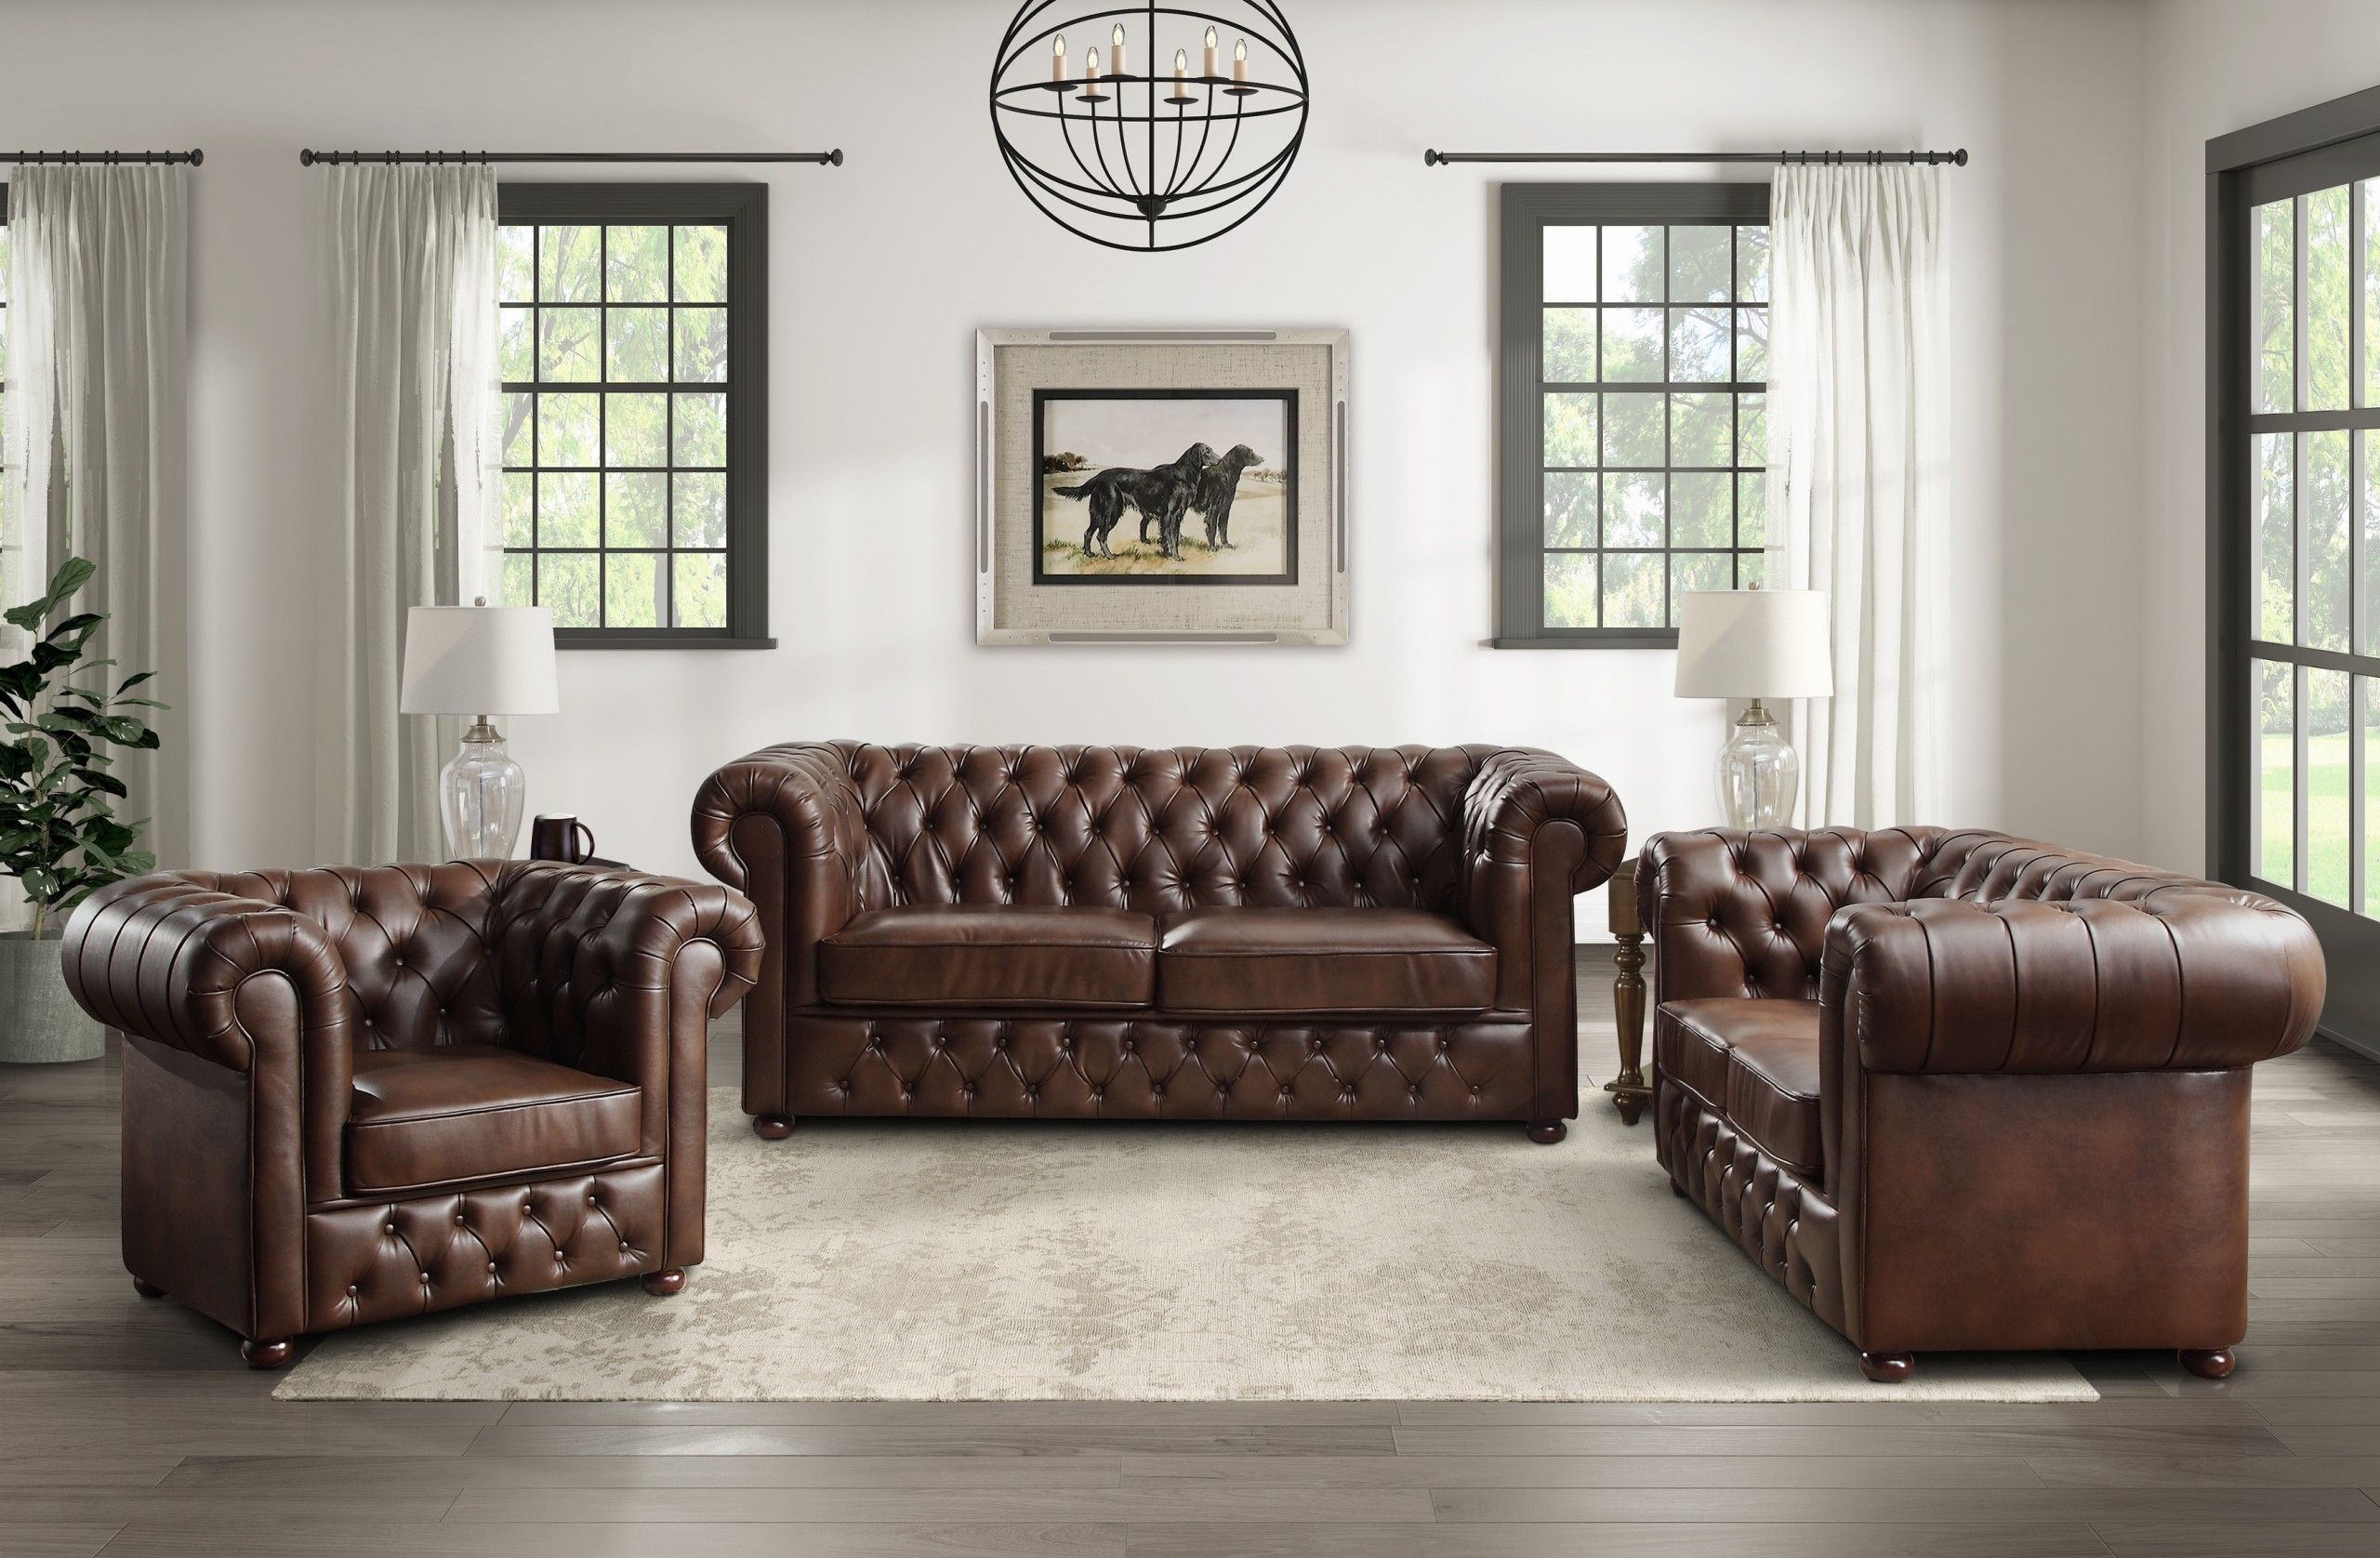 Faux Leather Chesterfield Sofa In Brown Finish – Oc Homestyle Furniture Pertaining To Faux Leather Sofas In Dark Brown (View 8 of 15)